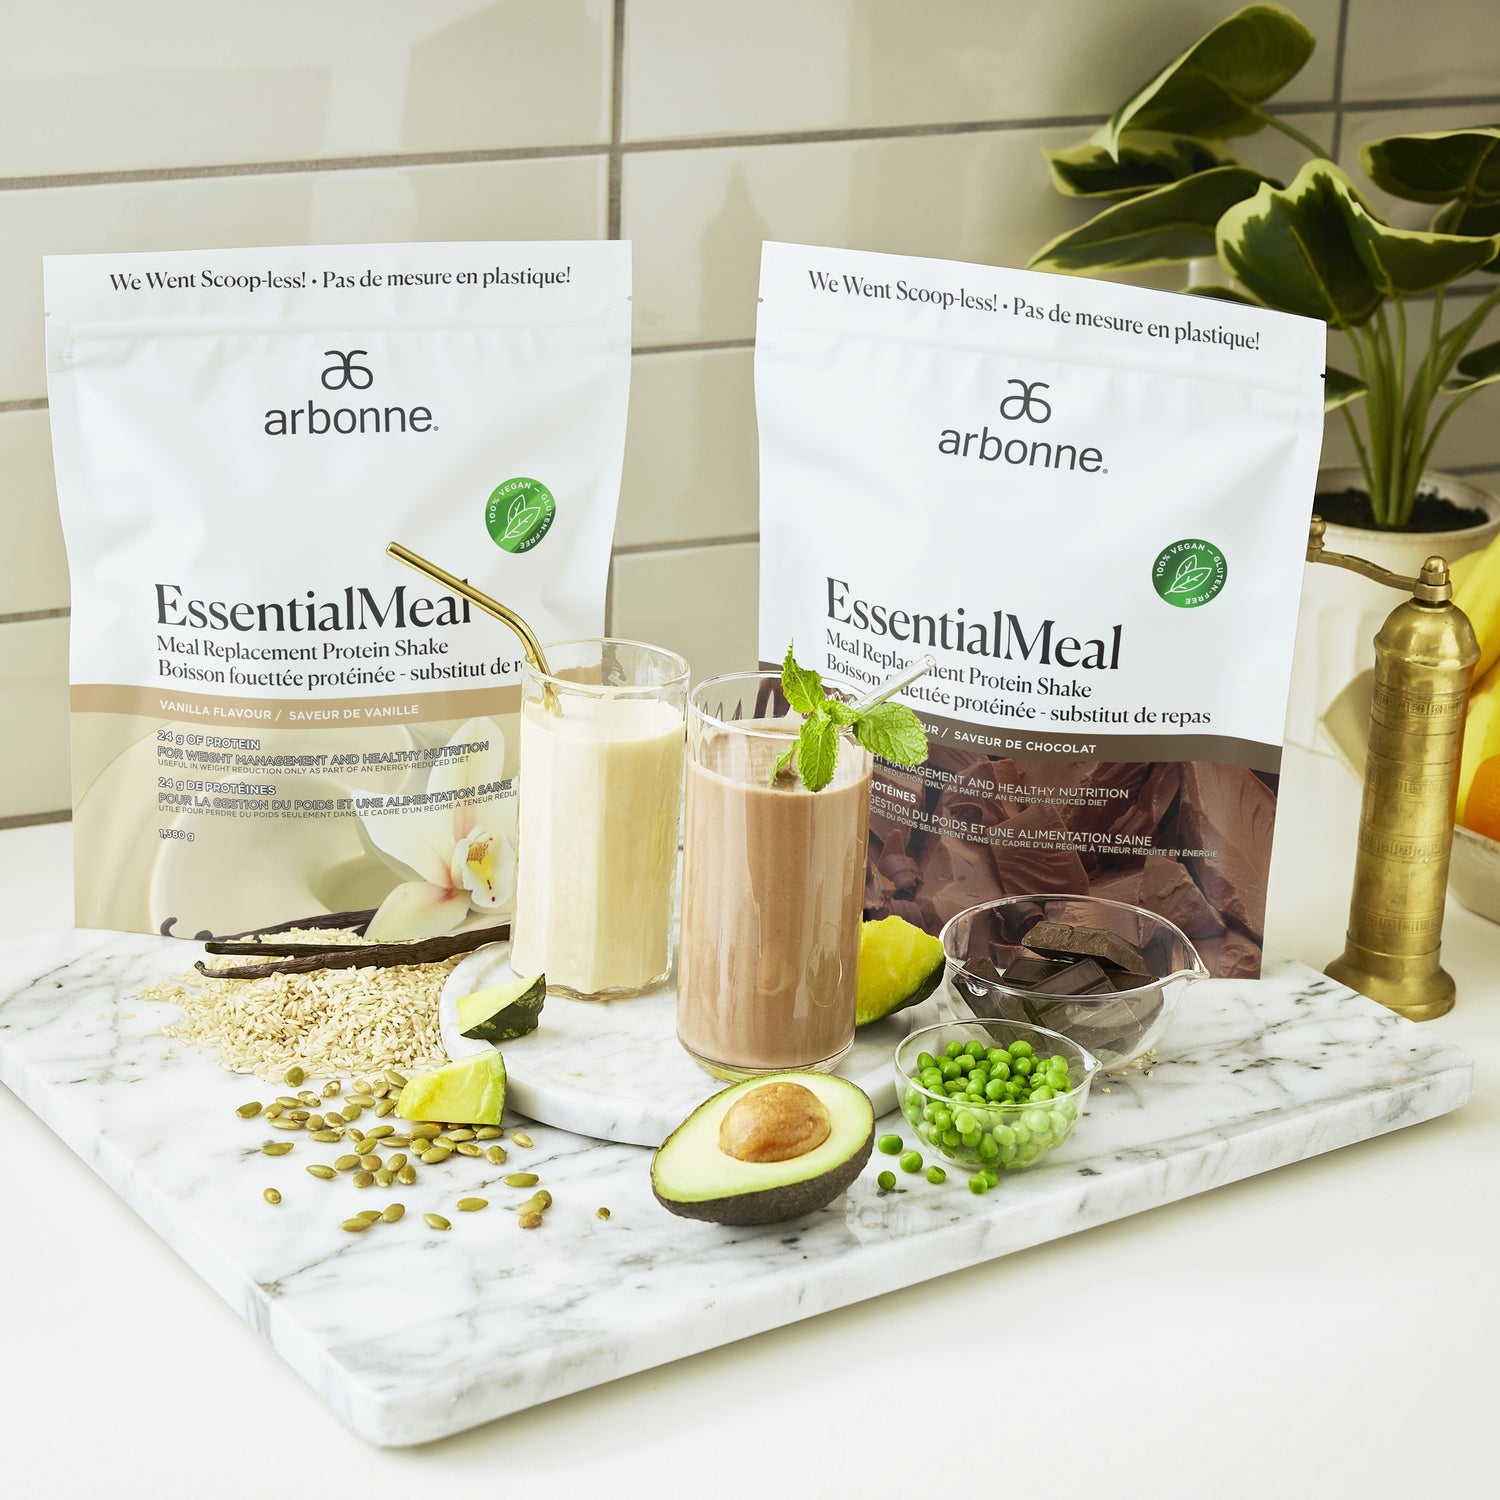 Arbonne EssentialMeal protein shakes in vanilla and chocolate flavors, served with fresh ingredients like avocado and peas on a marble countertop.